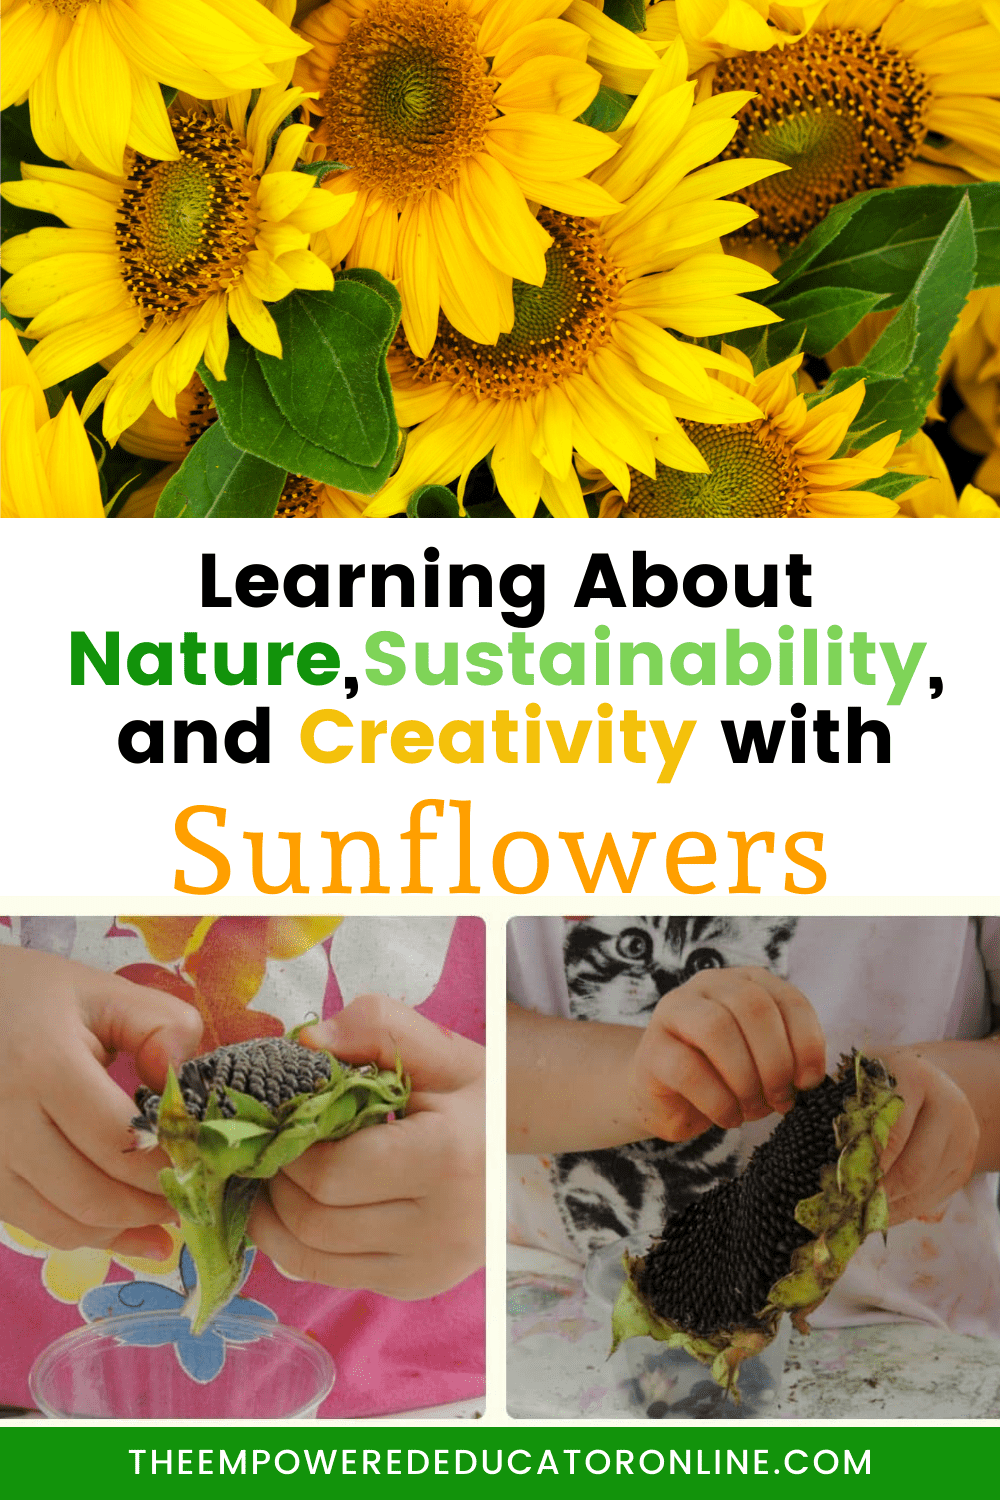 Learning through Sunflowers